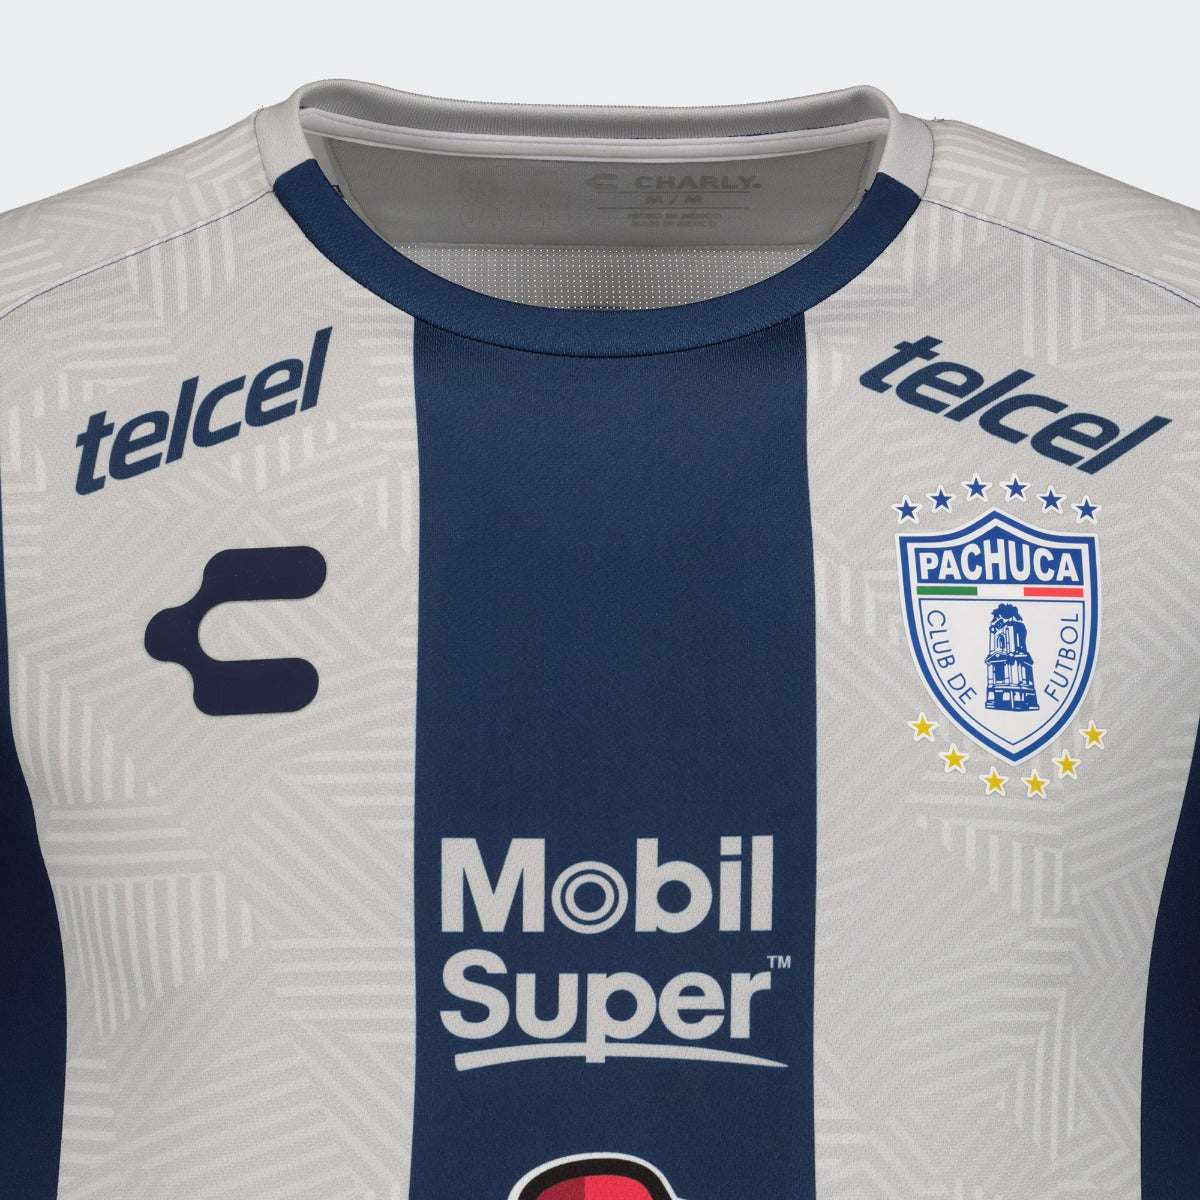 Charly 2020-21 Pachuca Home Jersey - Grey-Navy